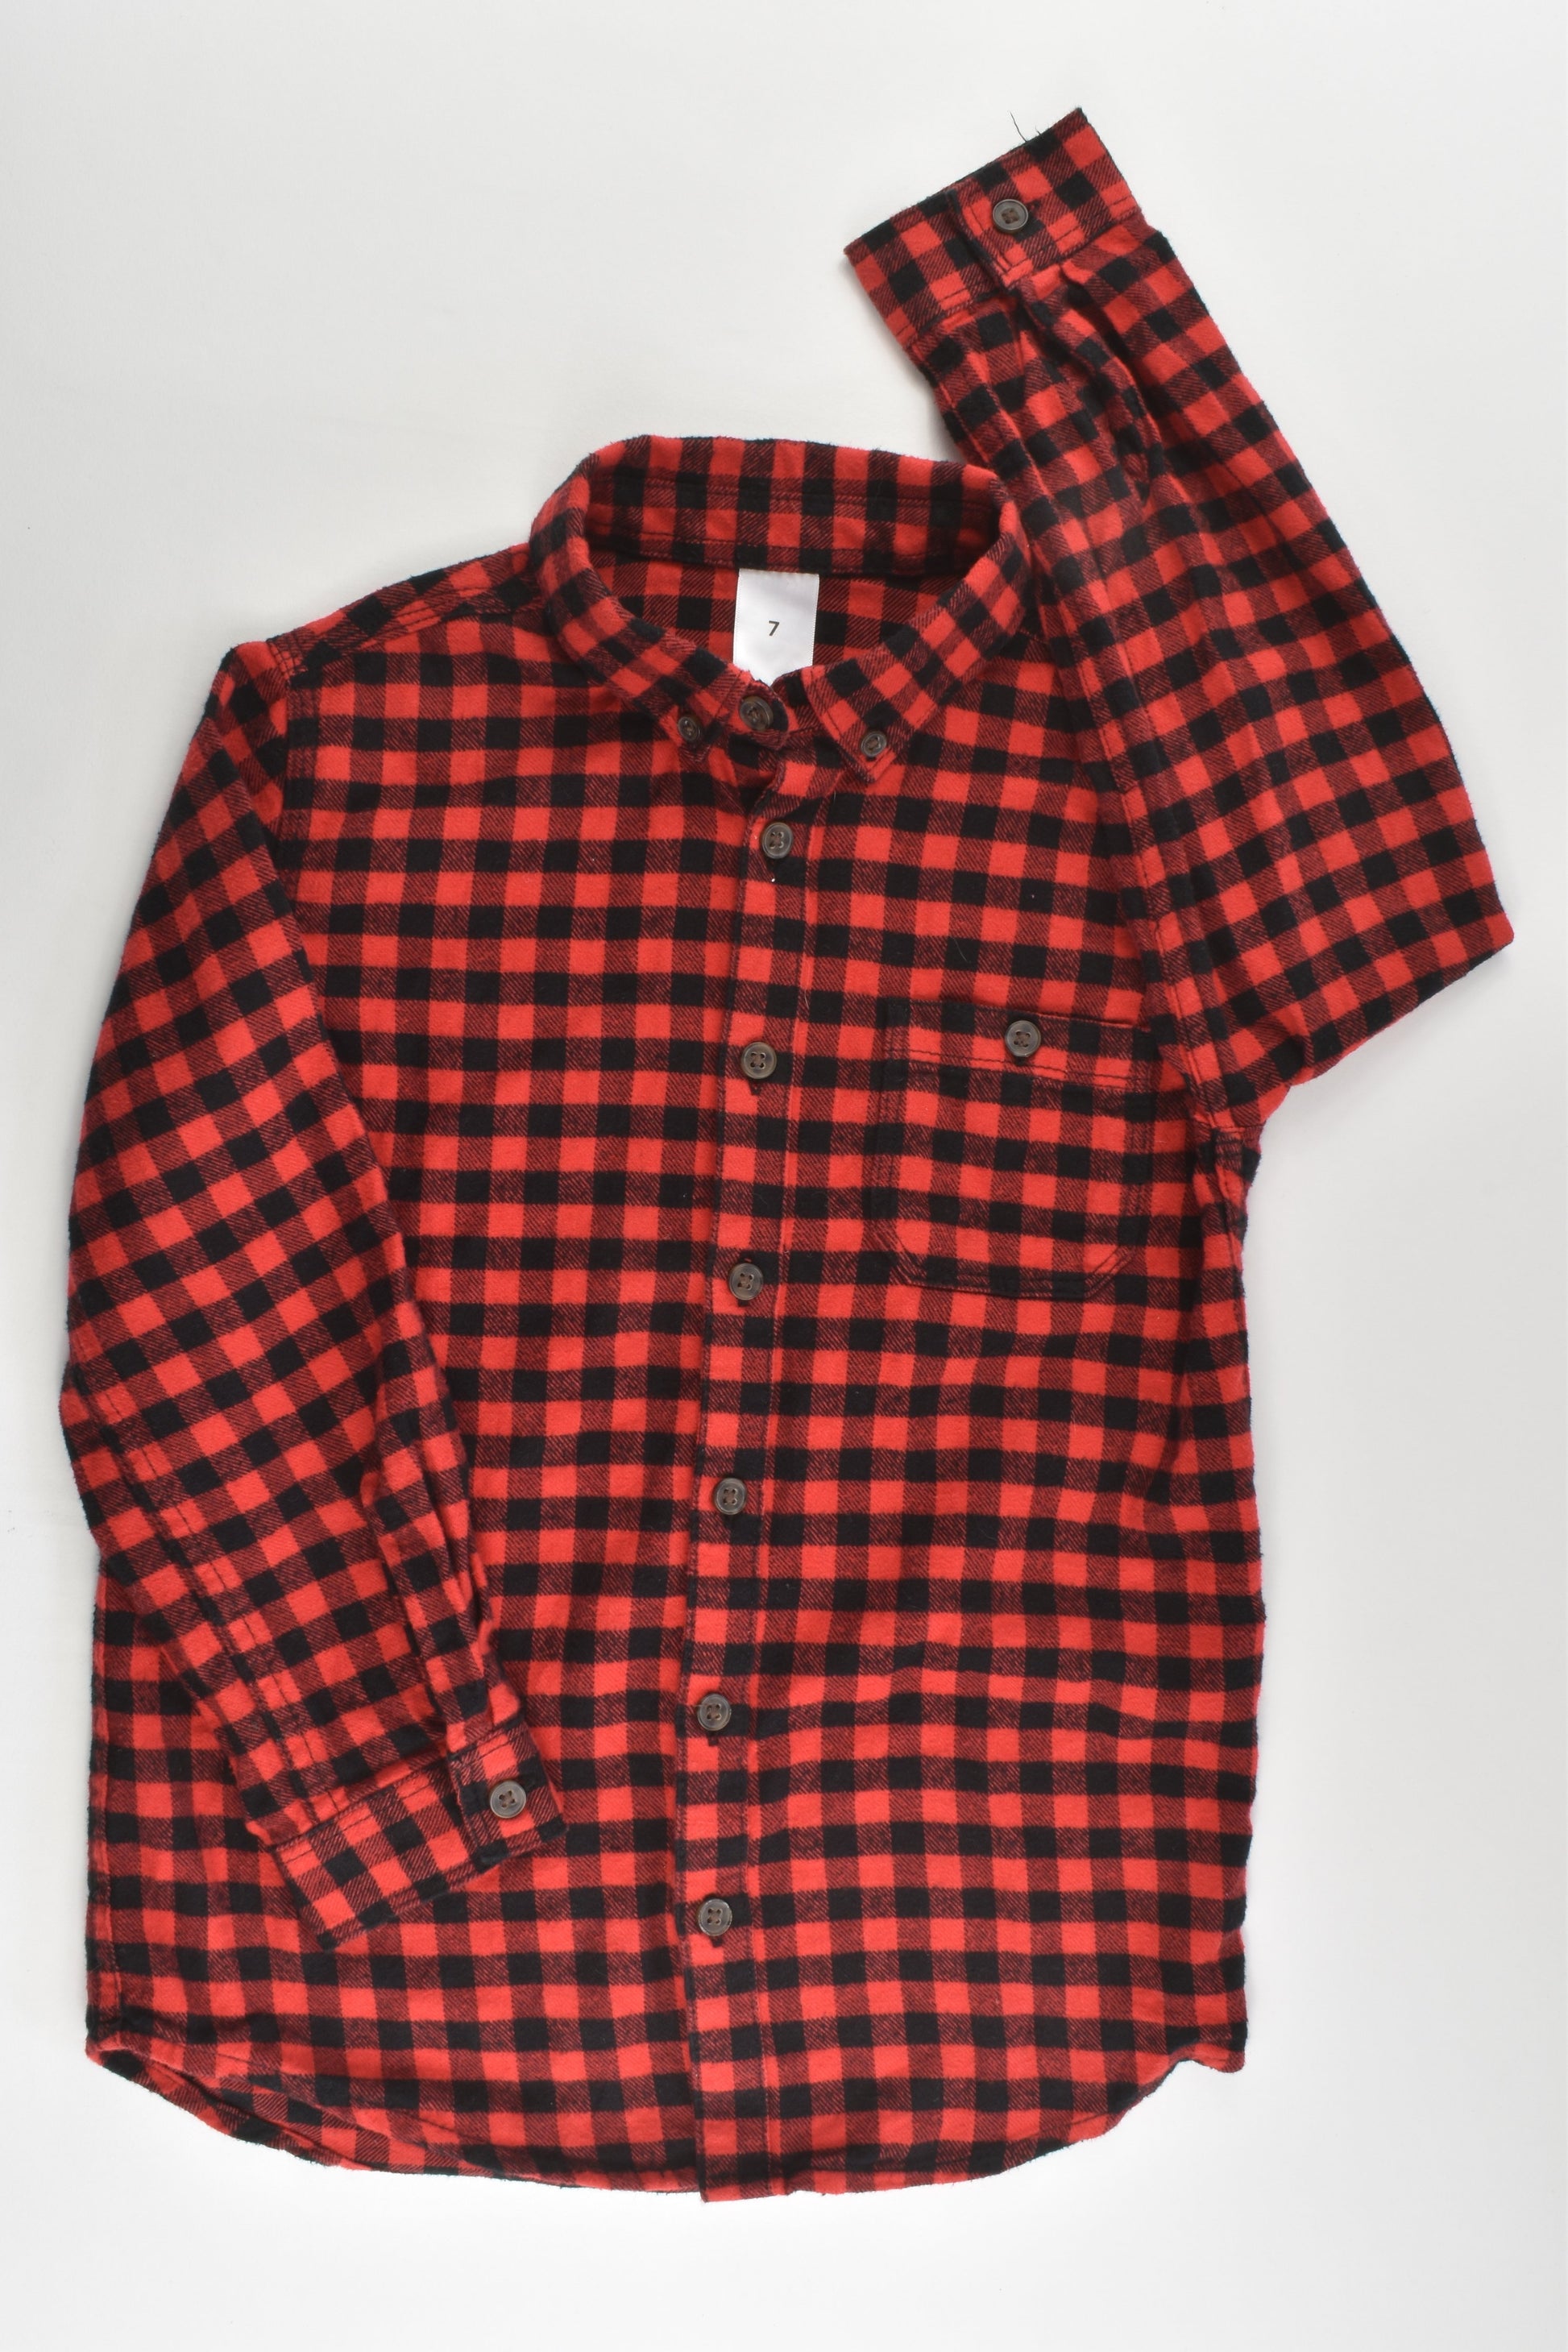 Target Size 7 Checked Casual Winter Shirt